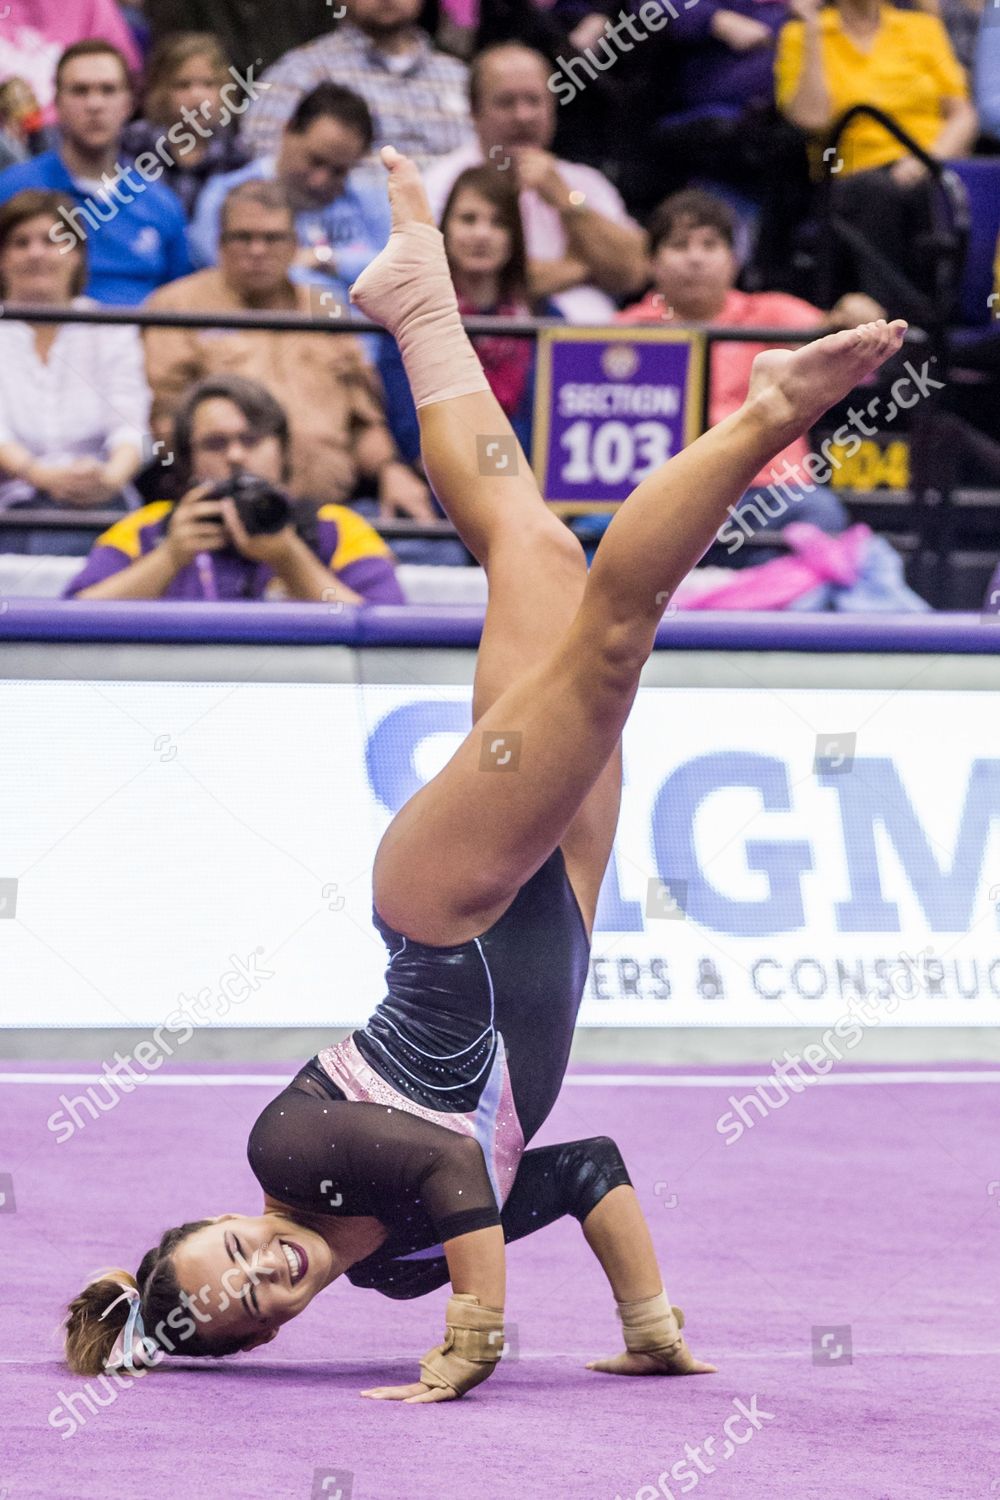 Lsu Tigers Gymnast Ashleigh Gnat Performs Editorial Stock Photo Stock Image Shutterstock